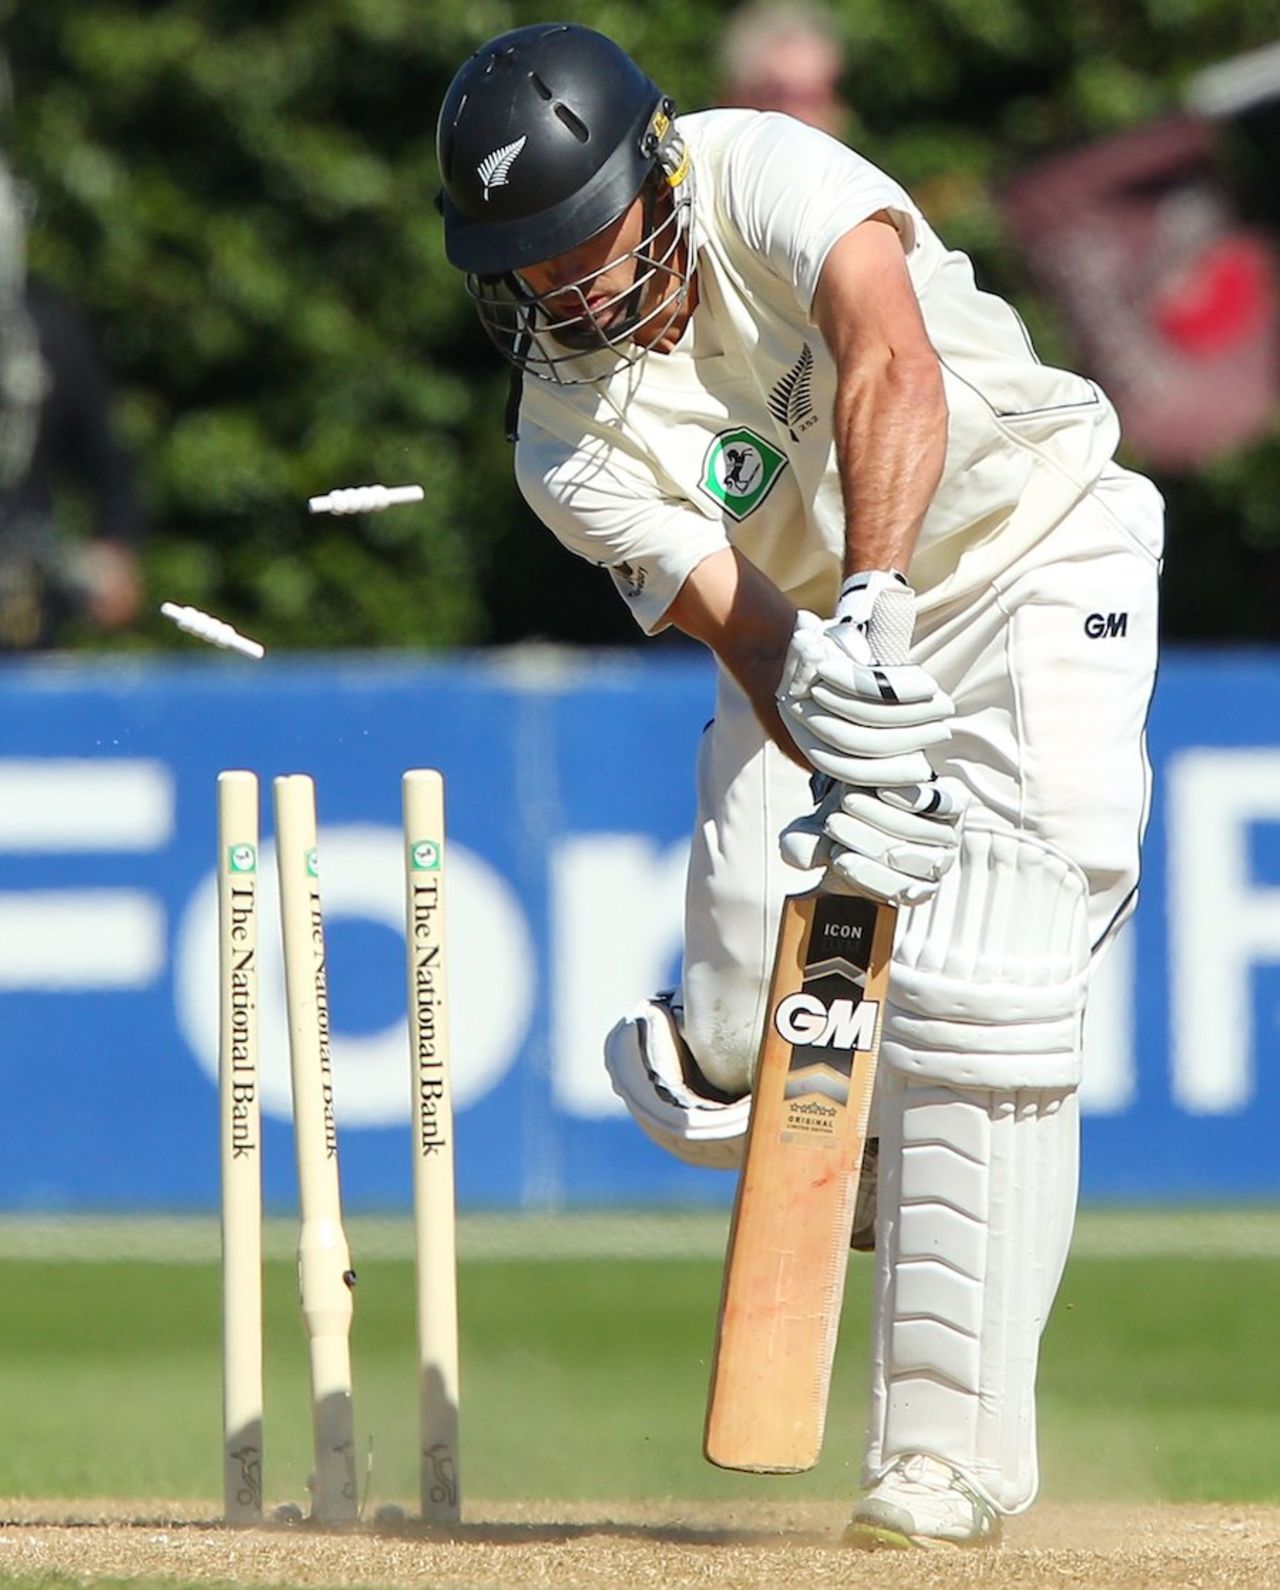 Dean Brownlie is bowled by a Morne Morkel yorker, New Zealand v South Africa, 3rd Test, Wellington, 5th day, March 27, 2012